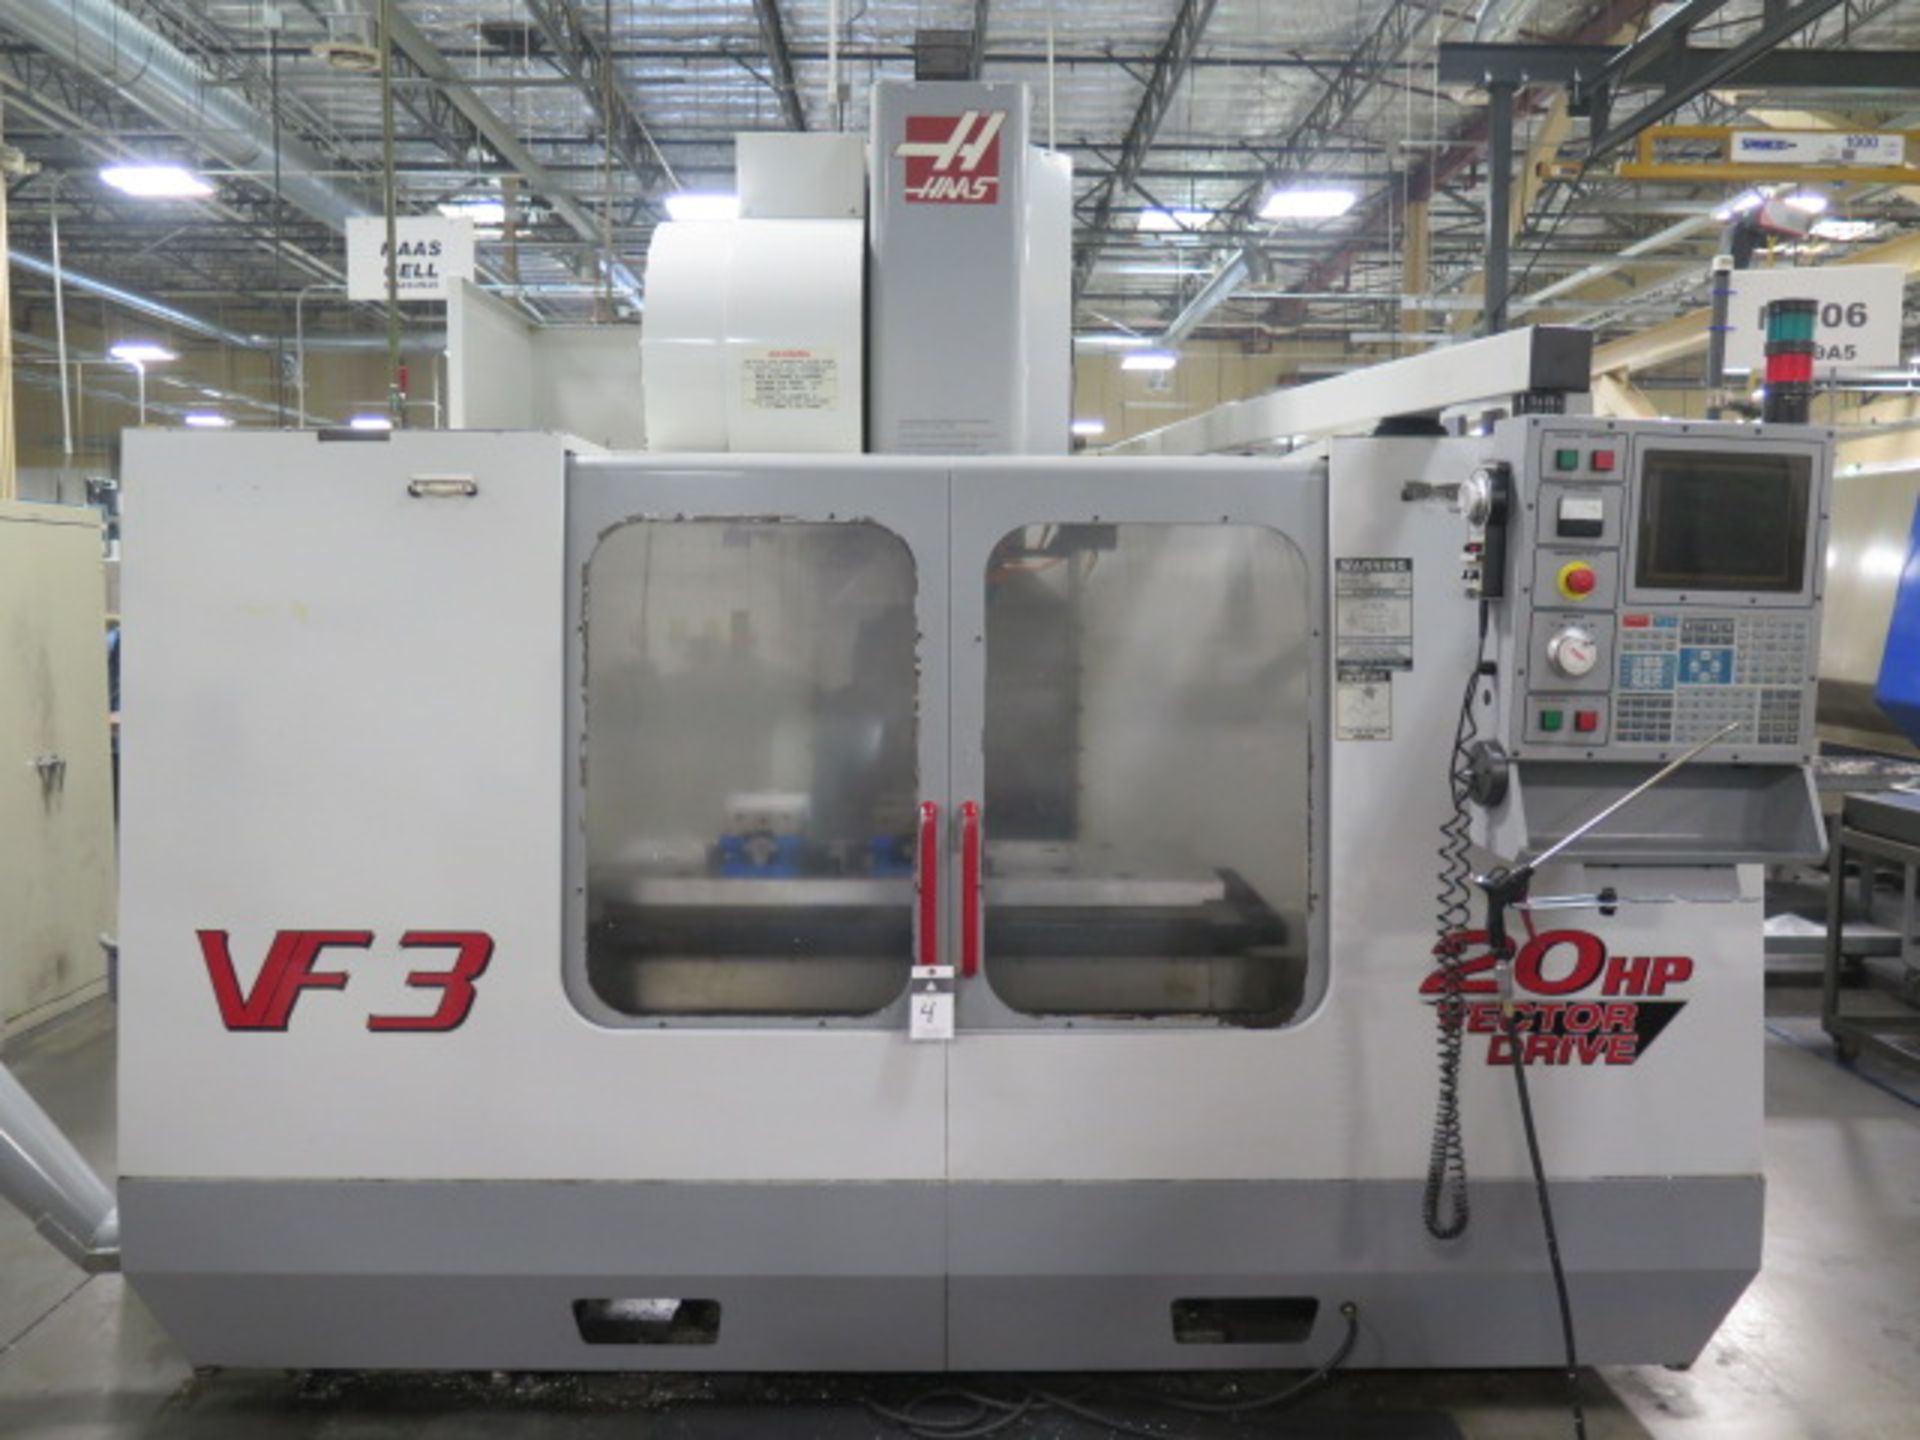 2000 Haas VF-3 4-Axis CNC Vertical Machining Center s/n 21059 w/ Haas Controls, 24-Station Side Mou